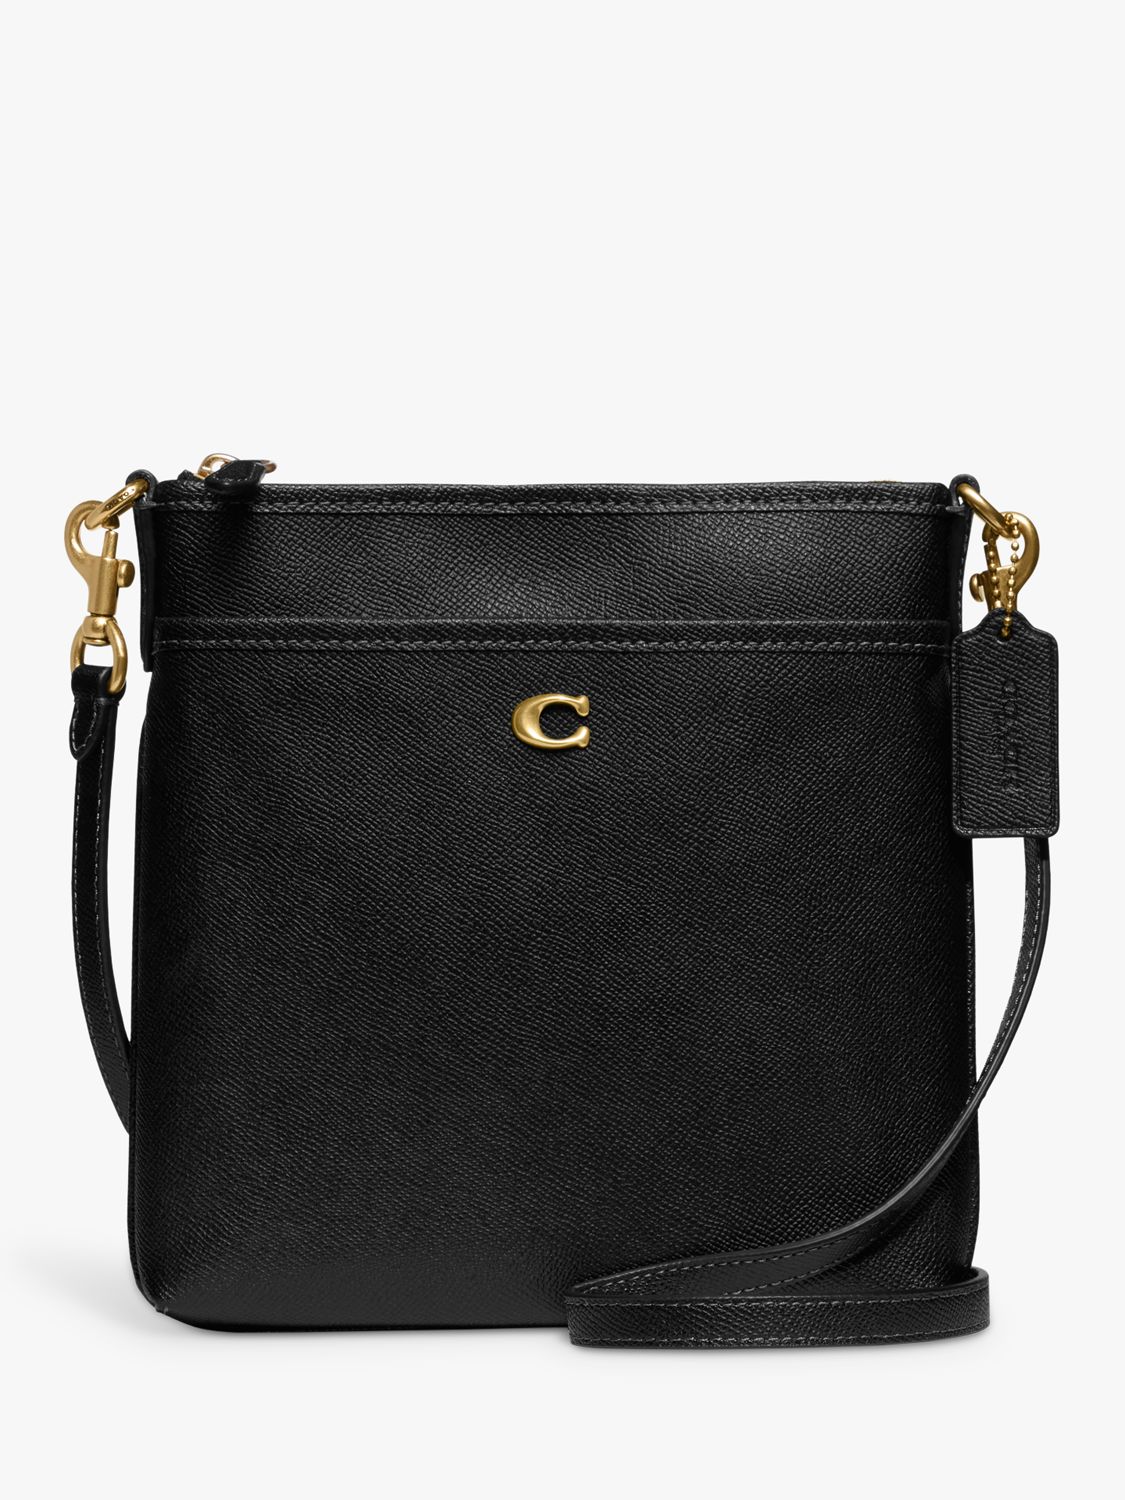 Coach Cary Leather Cross Body Bag, Black/Gold at John Lewis & Partners